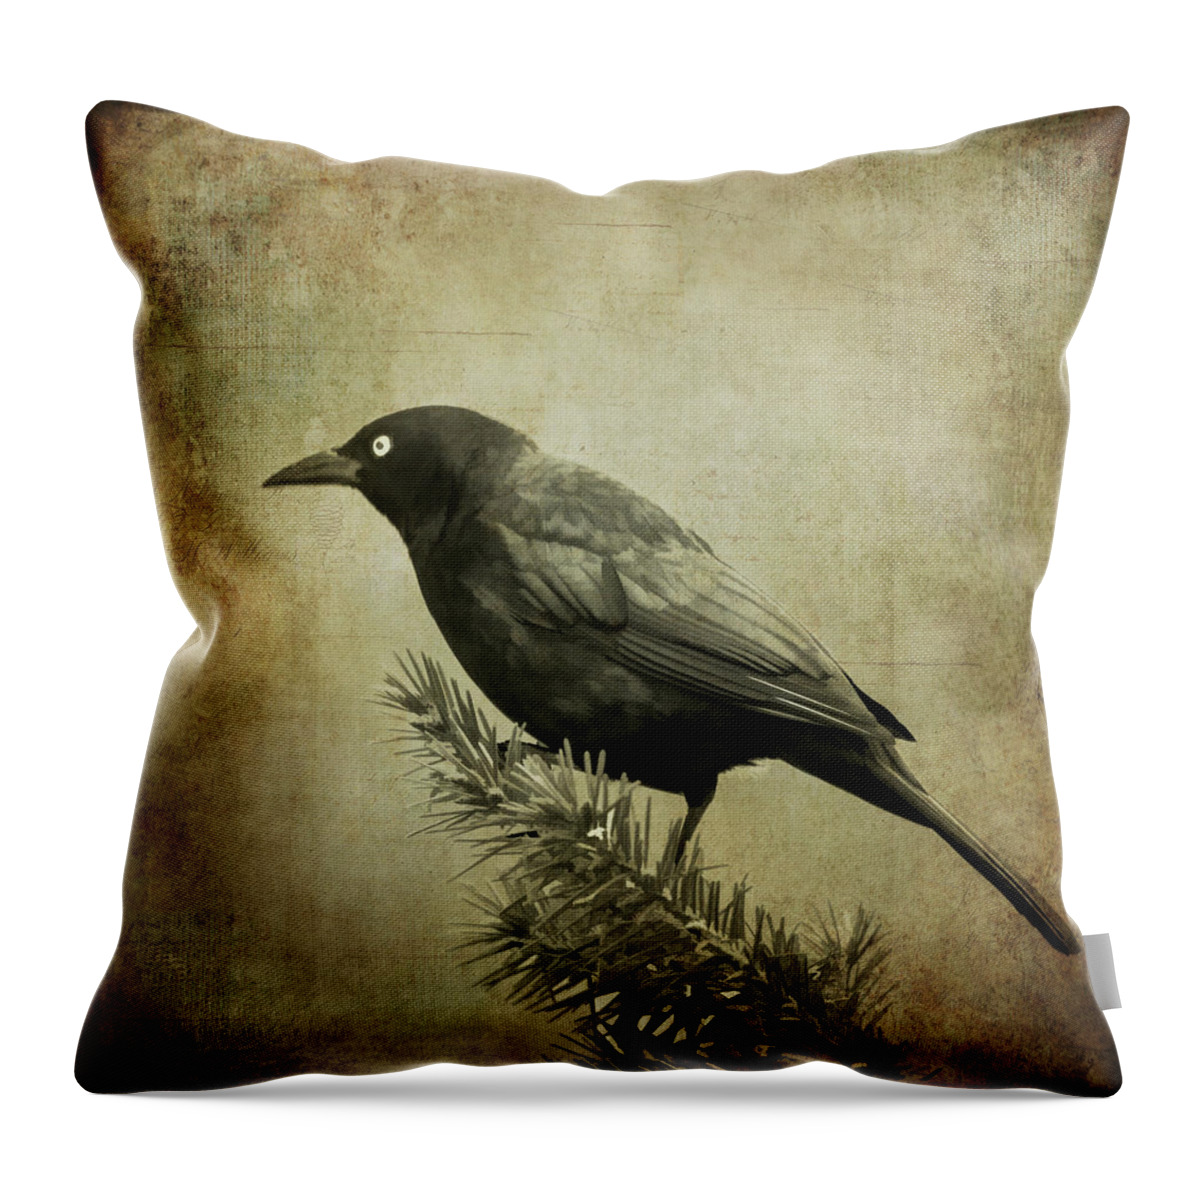 Bird Throw Pillow featuring the photograph The Grackle by Cathy Kovarik